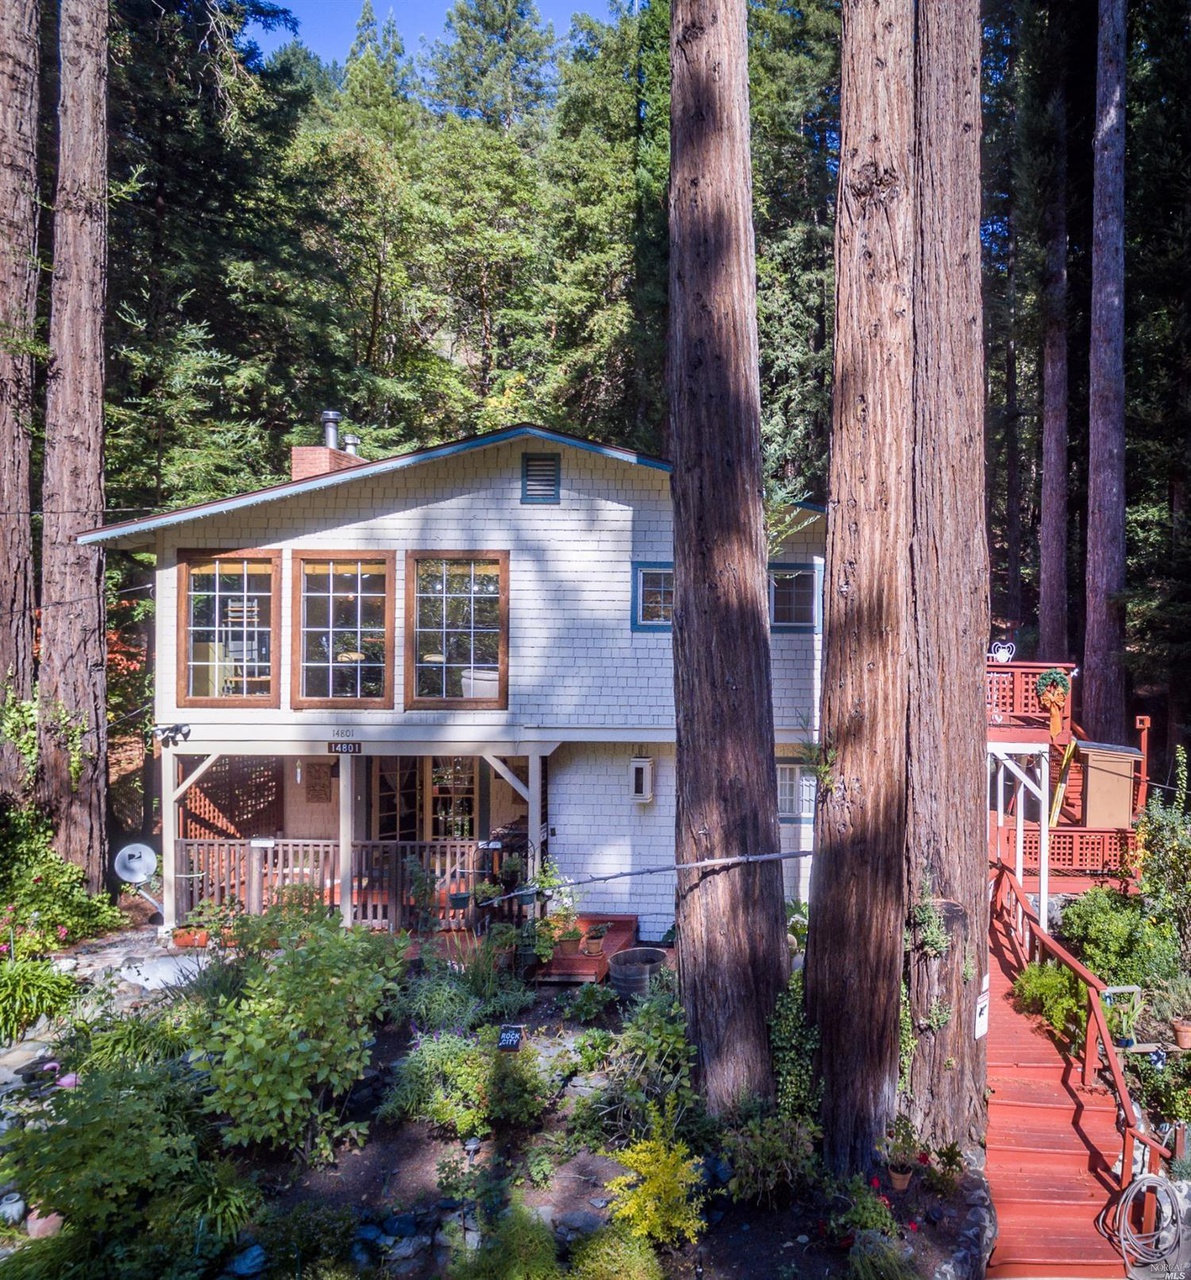 14801 Old Cazadero Rd Guerneville Ca 95446 Mls 21725263 Redfin